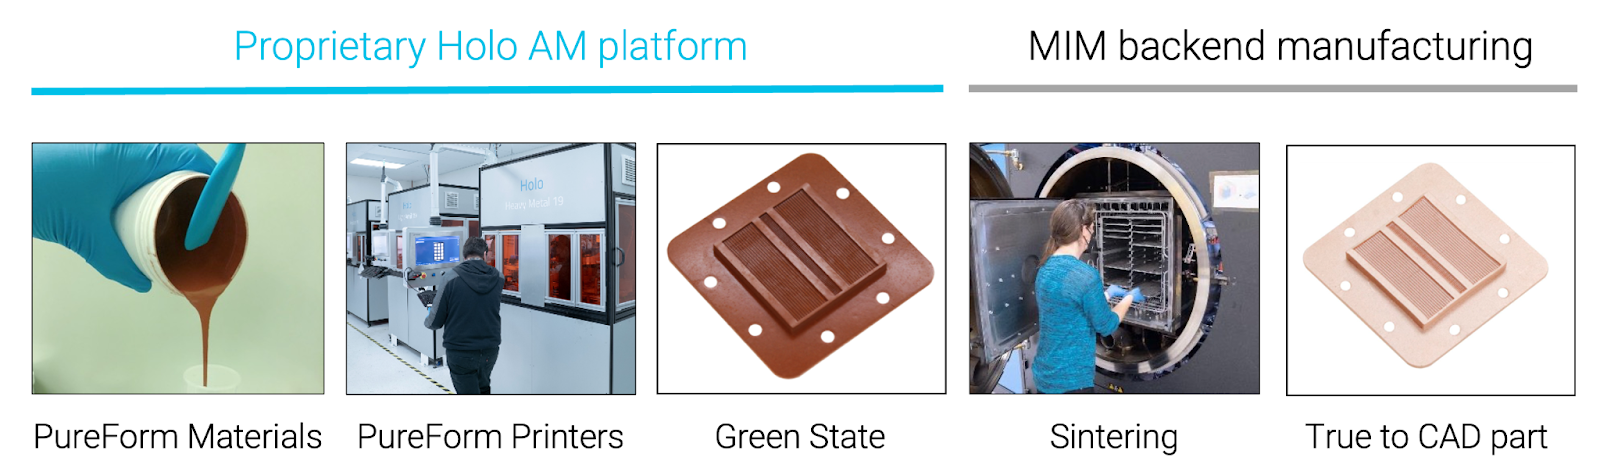 An overview of the steps, processes, and materials involved in PureForm metal additive manufacturing, including PureForm materials, PureForm printers, green state parts, sintering, and finally a True-to-CAD™ part